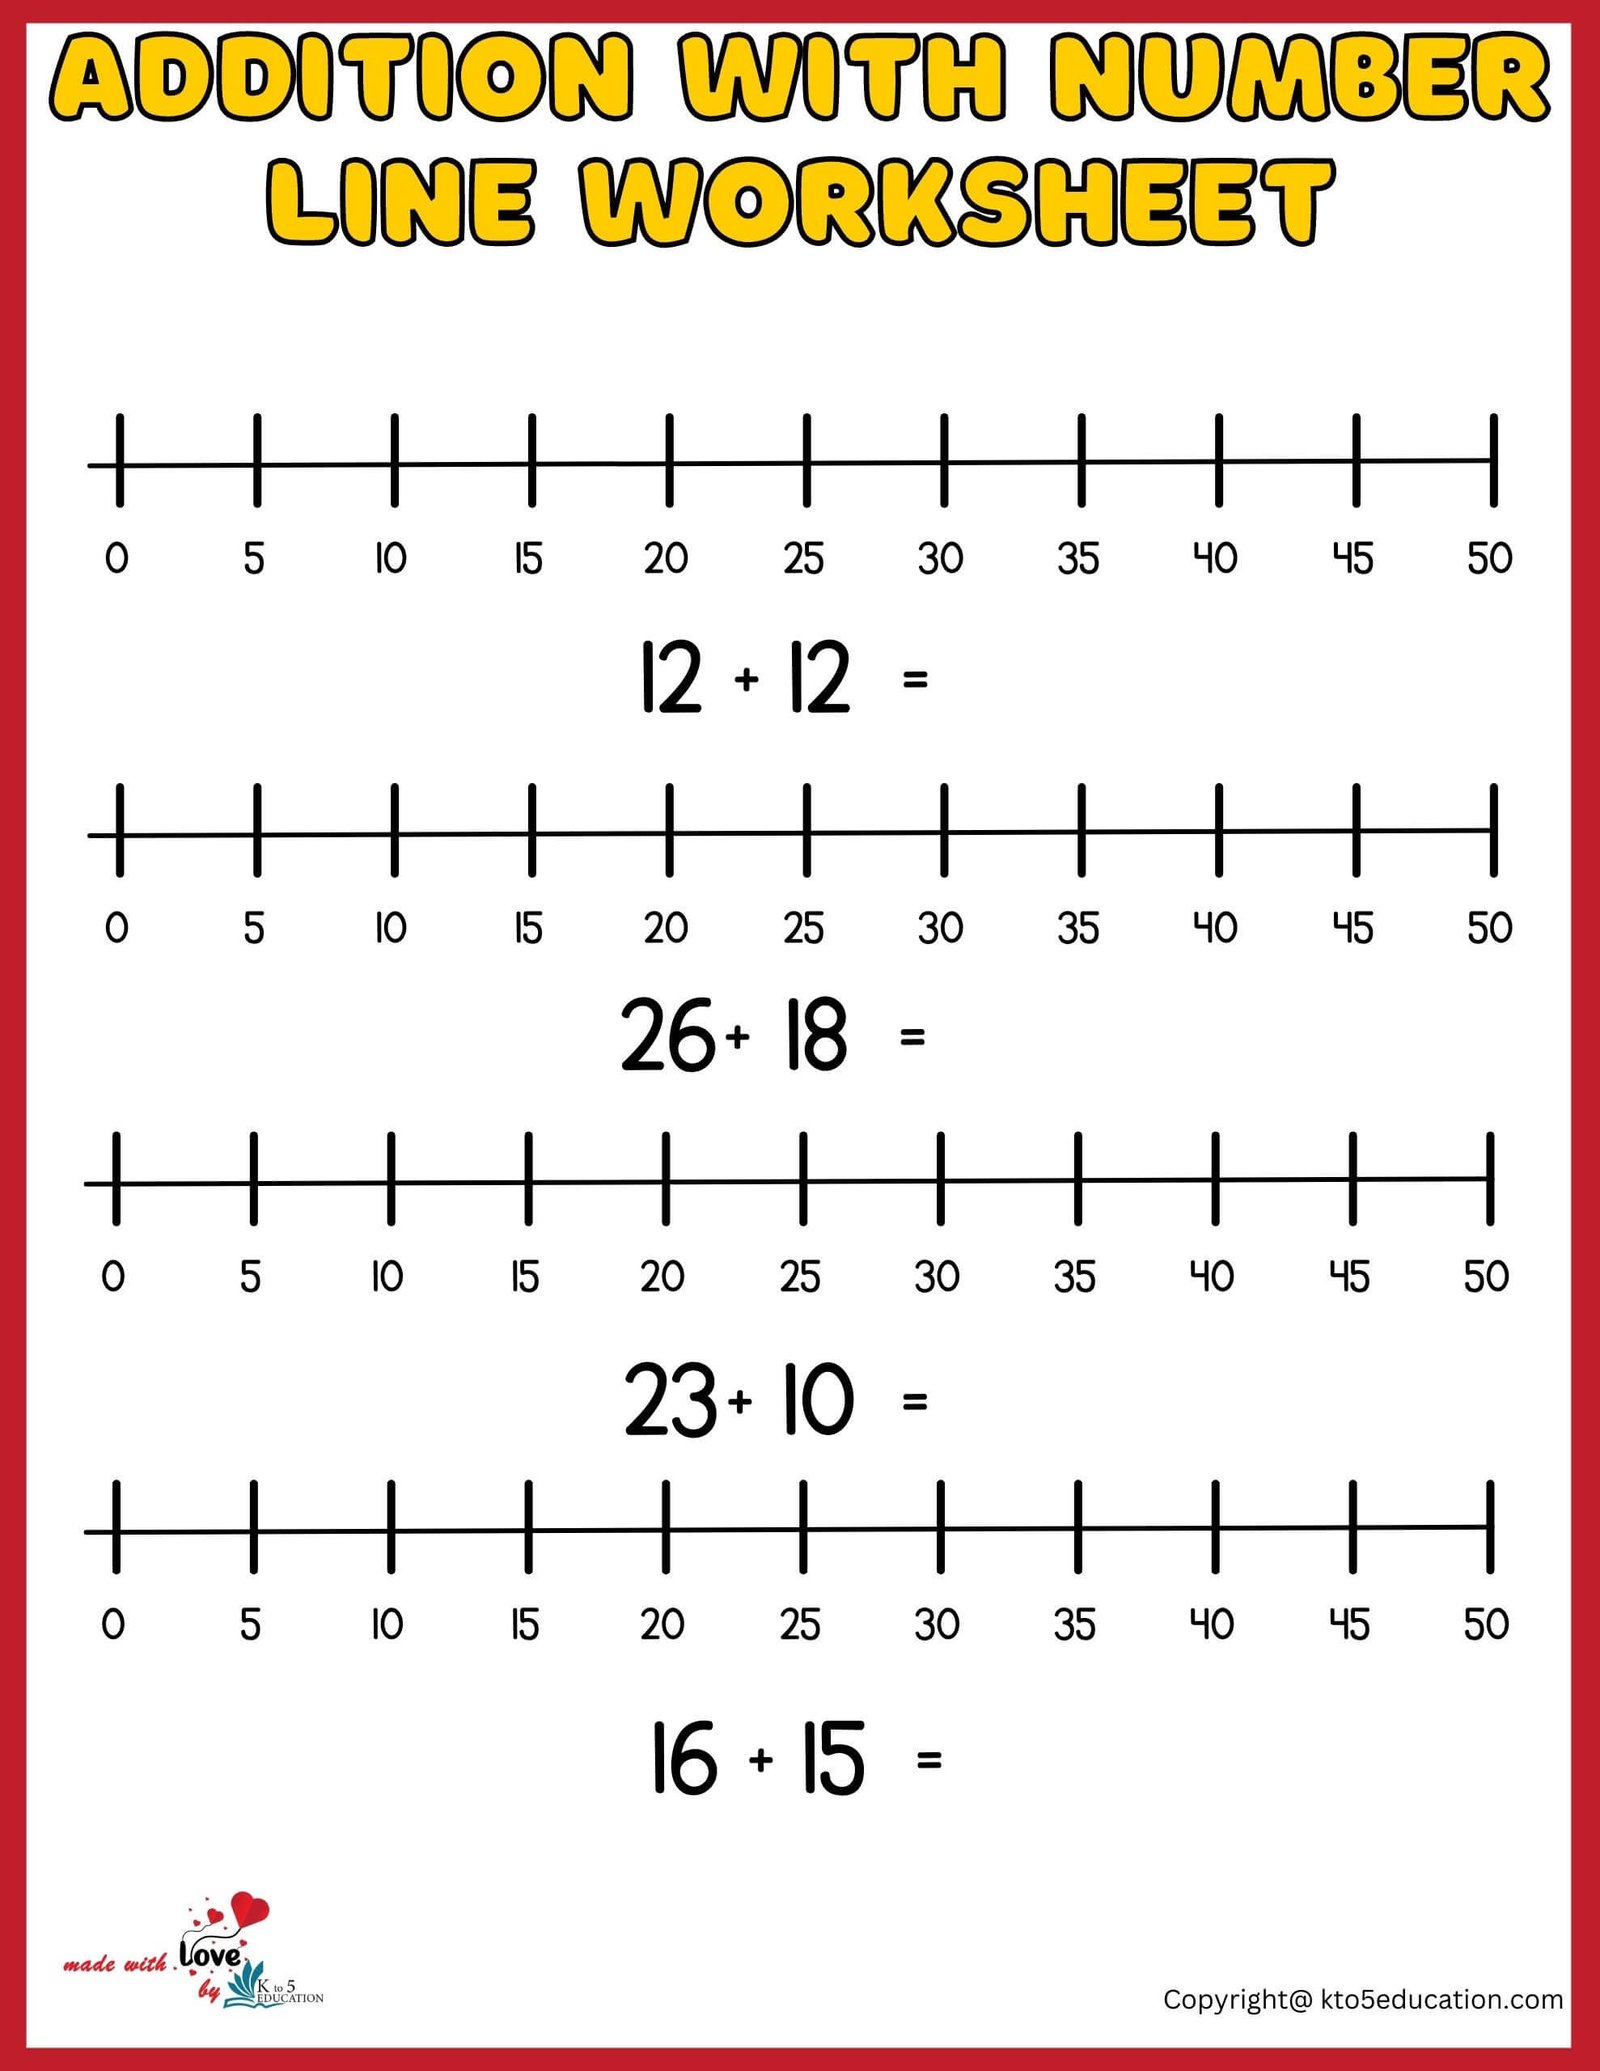 Free Addition With Number Line Printable Worksheet 1-50